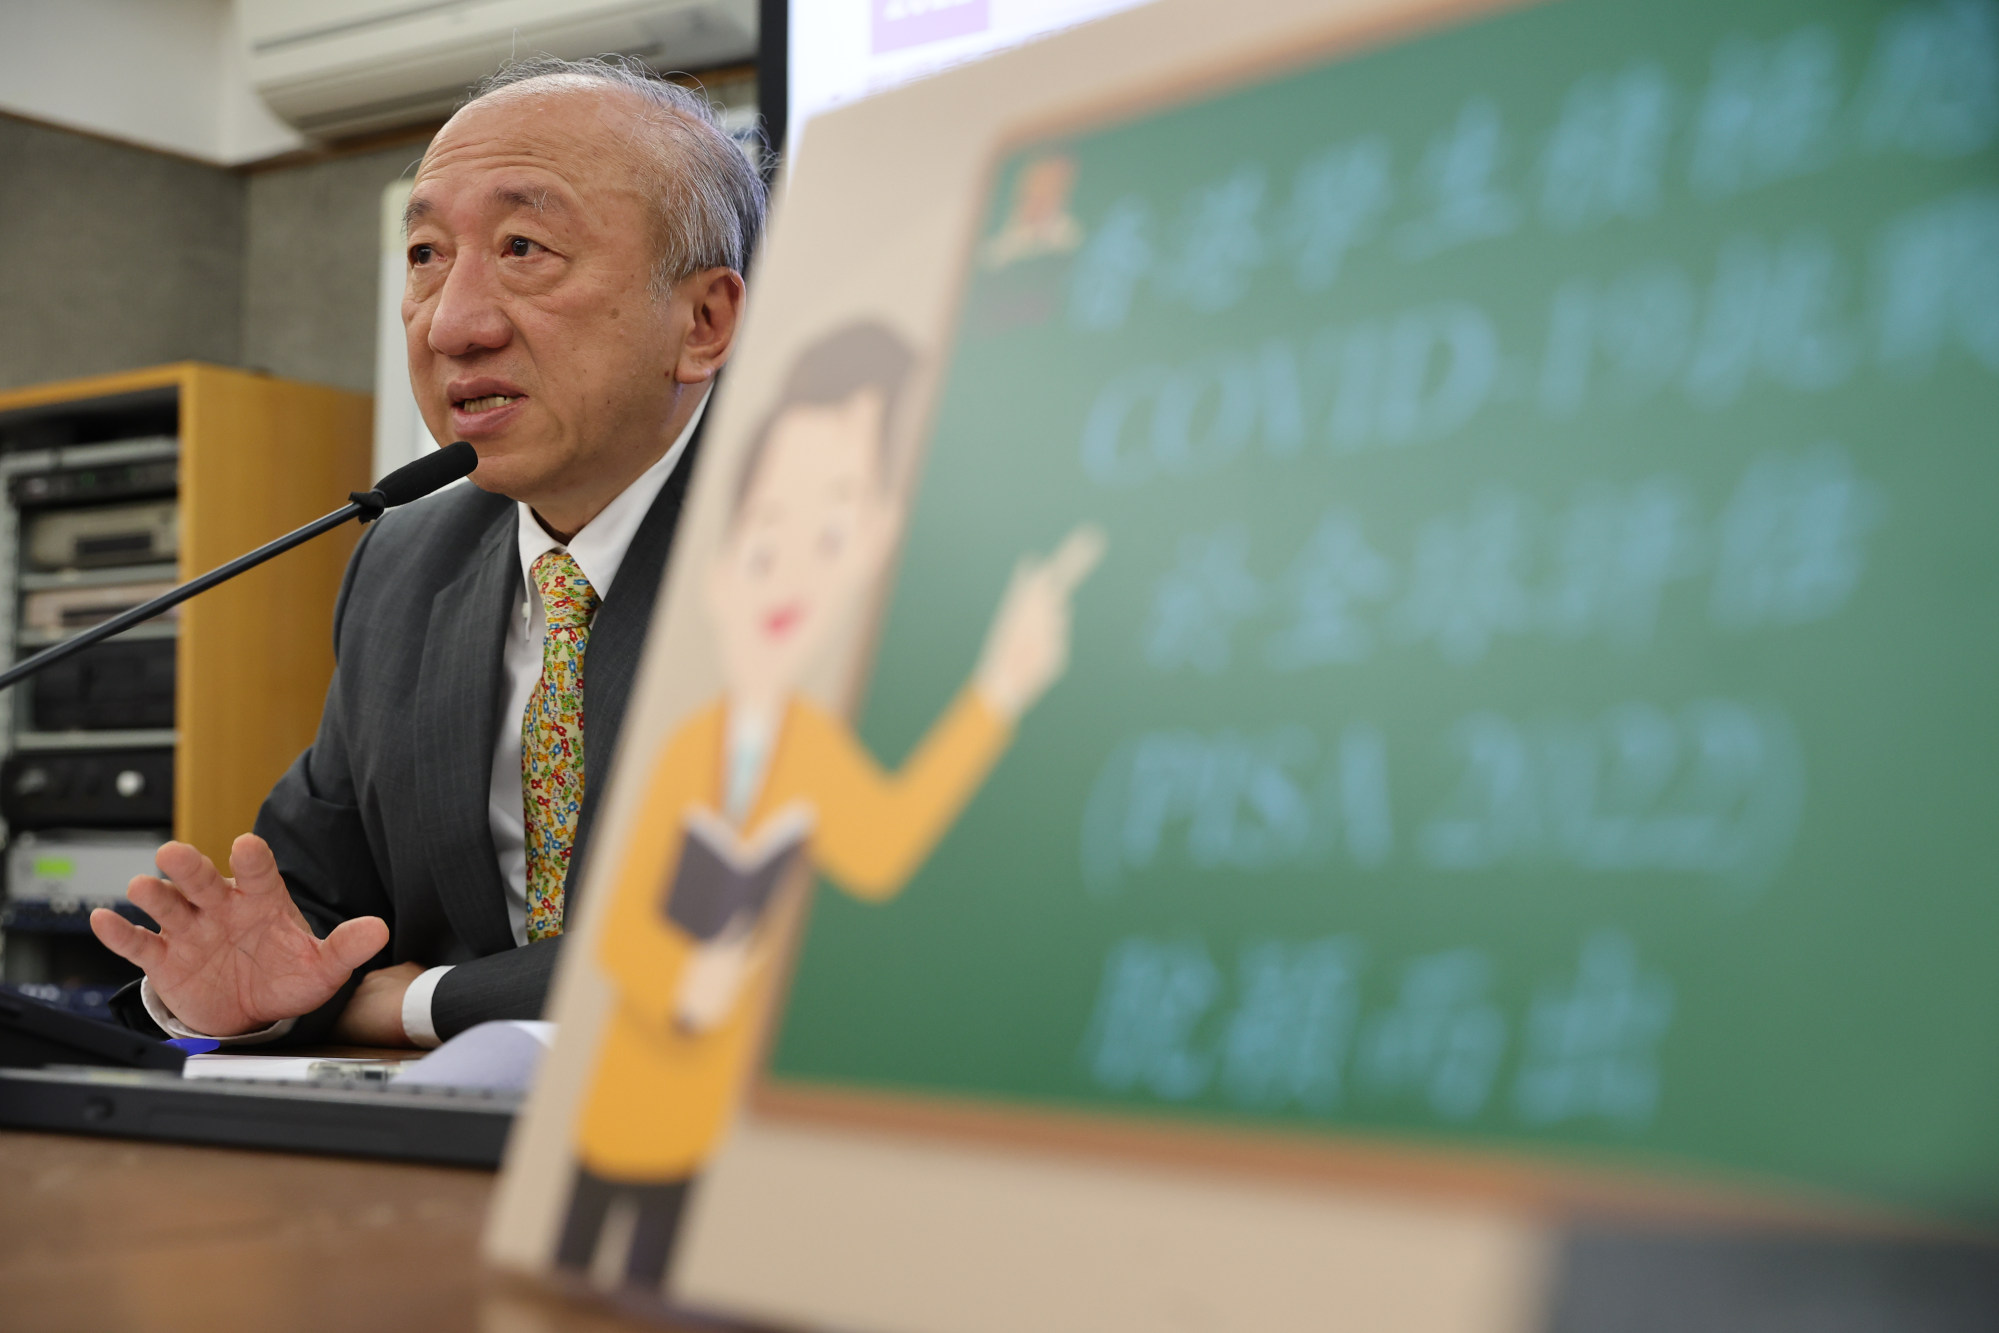 Professor Hau Kit-tai says the score in reading fell because of school closures during the pandemic. Photo: Edmond So